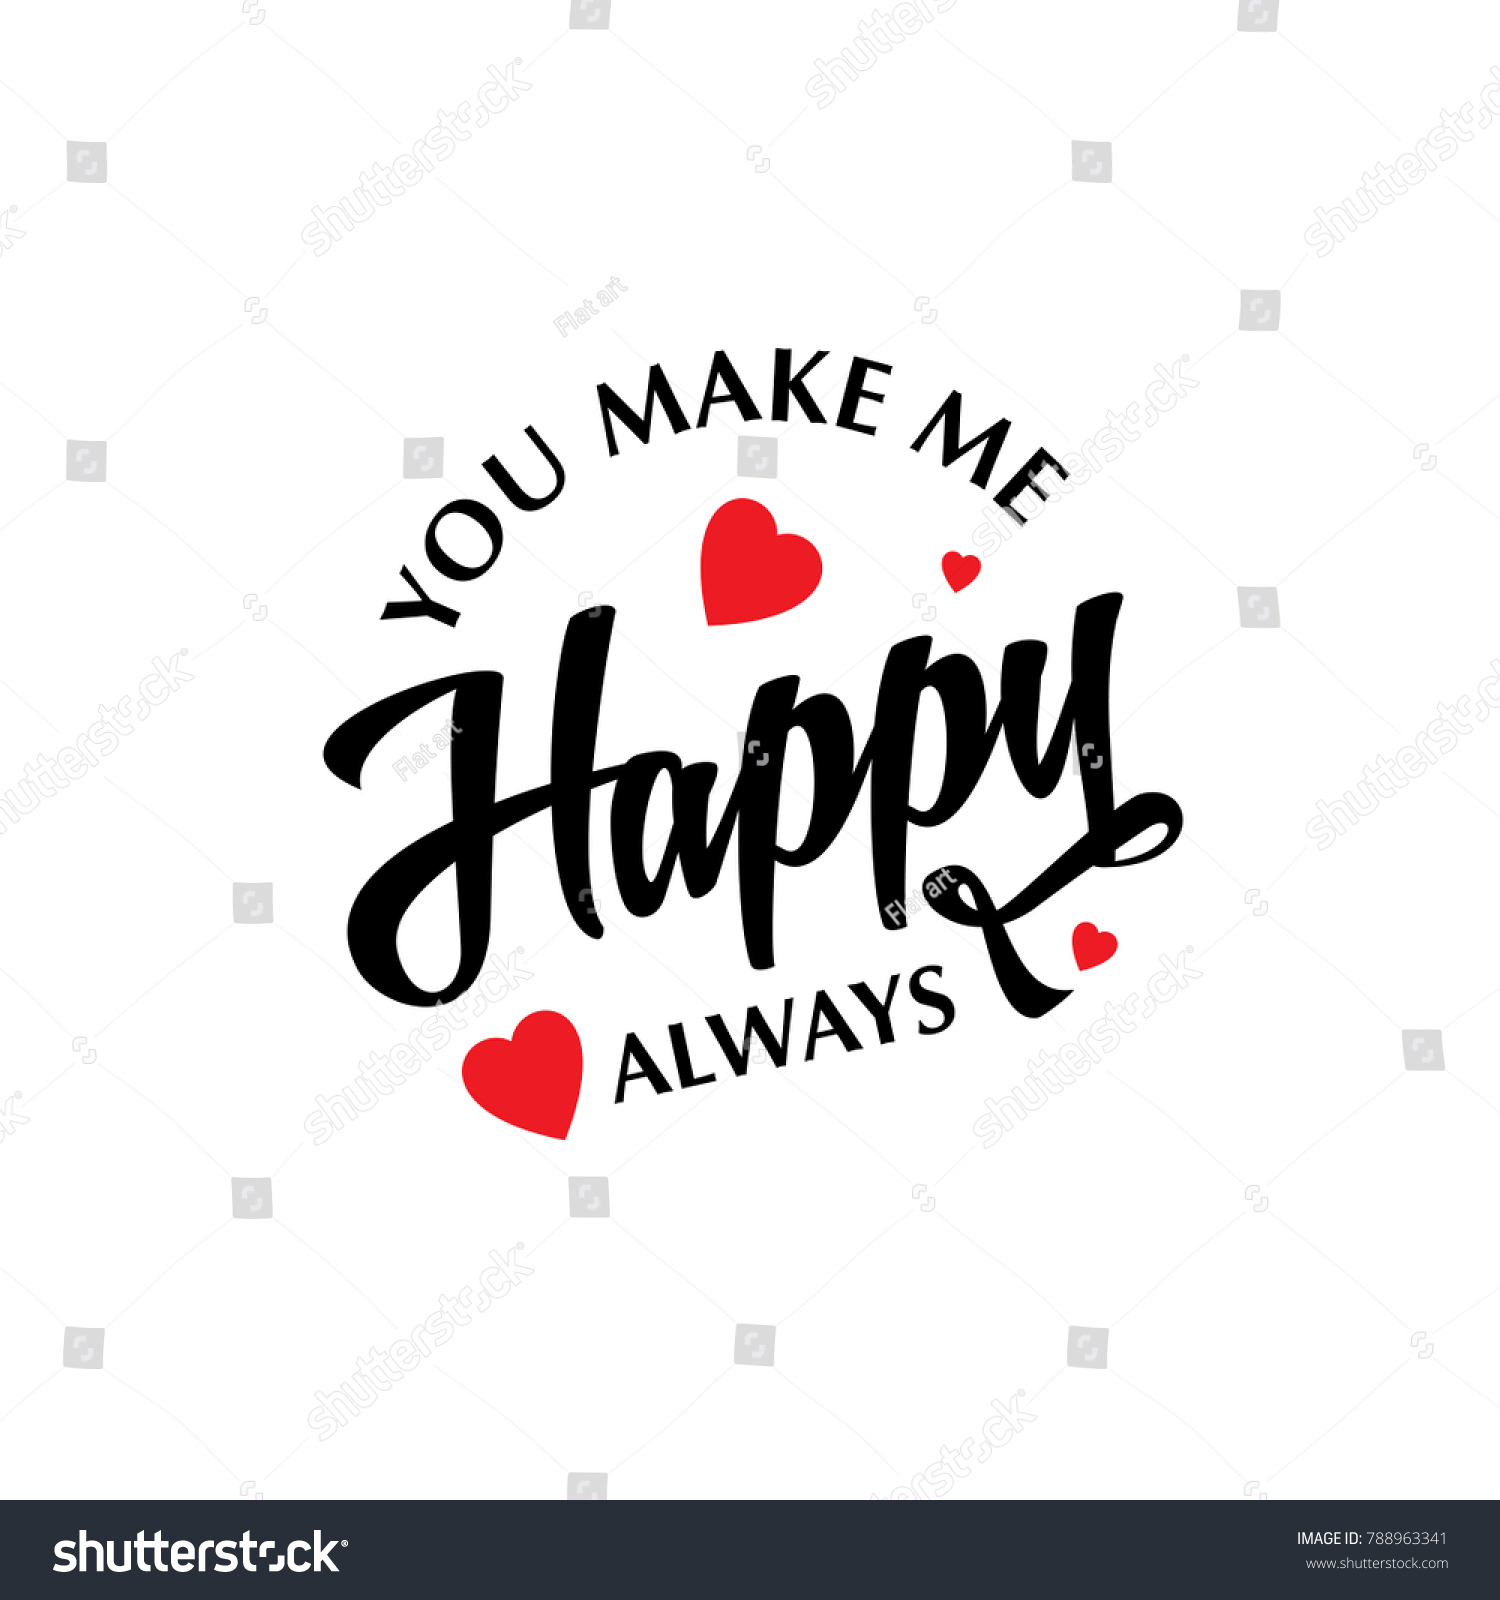 You Make Me Happy Always Vector Stock Vector Royalty Free